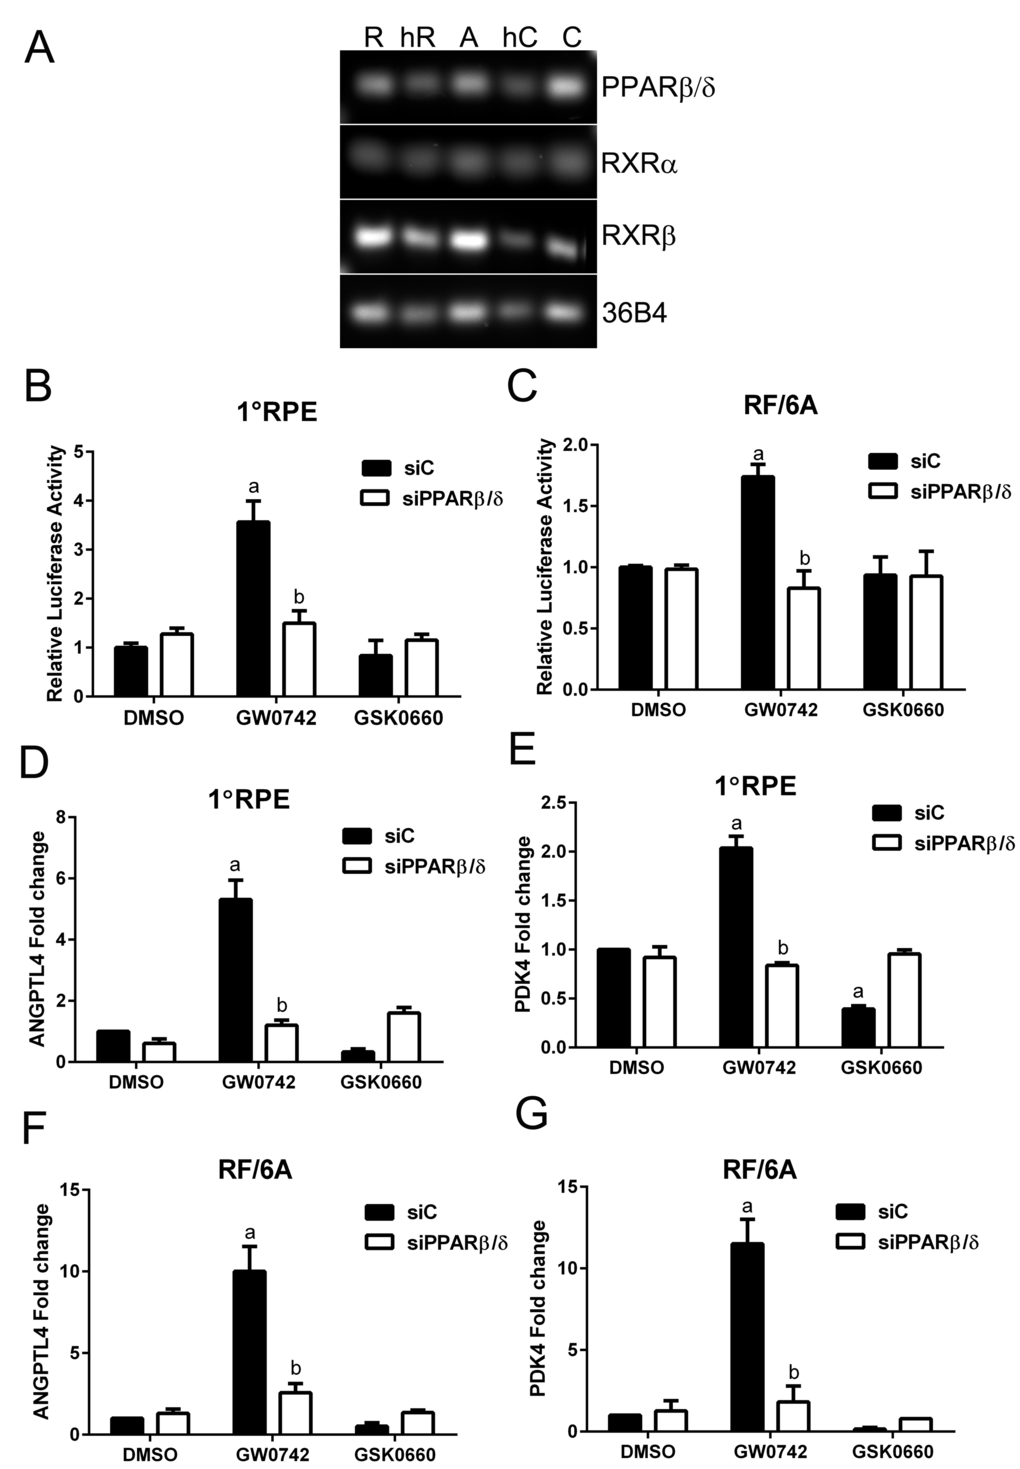 PPARβ/δ signaling pathway is functional in AMD vulnerable cells. (A) Agarose gel image of PCR amplification products of PPARβ/δ and its obligate binding partners RXRα and RXRβ in primary human RPE cells [R], freshly isolated human RPE cells [hR], ARPE19 cells [A], human choroid [hC], and RF/6A cells [C], 36B4 was used as loading control. PPARβ/δ activity in primary RPE (1°RPE) cells (B) and RF/6A cells (C) transfected with the DR1 luciferase reporter and siC or siPPARβ/δ; cells were treated with PPARβ/δ agonist, GW0742 (10μM) or antagonist, GSK0660 (10μM) or DMSO as vehicle control (n = 3): a: p  0.05 relative to DMSO treated cells; b: p  0.05 relative to drug+siC treated cells (p ANGPTL4 and PDK4 mRNA in primary RPE (1°RPE) cells (D and E) and RF/6A (F and G) in siC and siPPARβ/δ (100 pmoles/250,000 cells) treated cells in response to GW0742, GSK0660, or DMSO as a control (n = 3); a: p  0.05 relative to DMSO treated cells; b: p  0.05 relative to drug+siC treated cells (Two way ANOVA, Sidak’s multiple comparisons test).